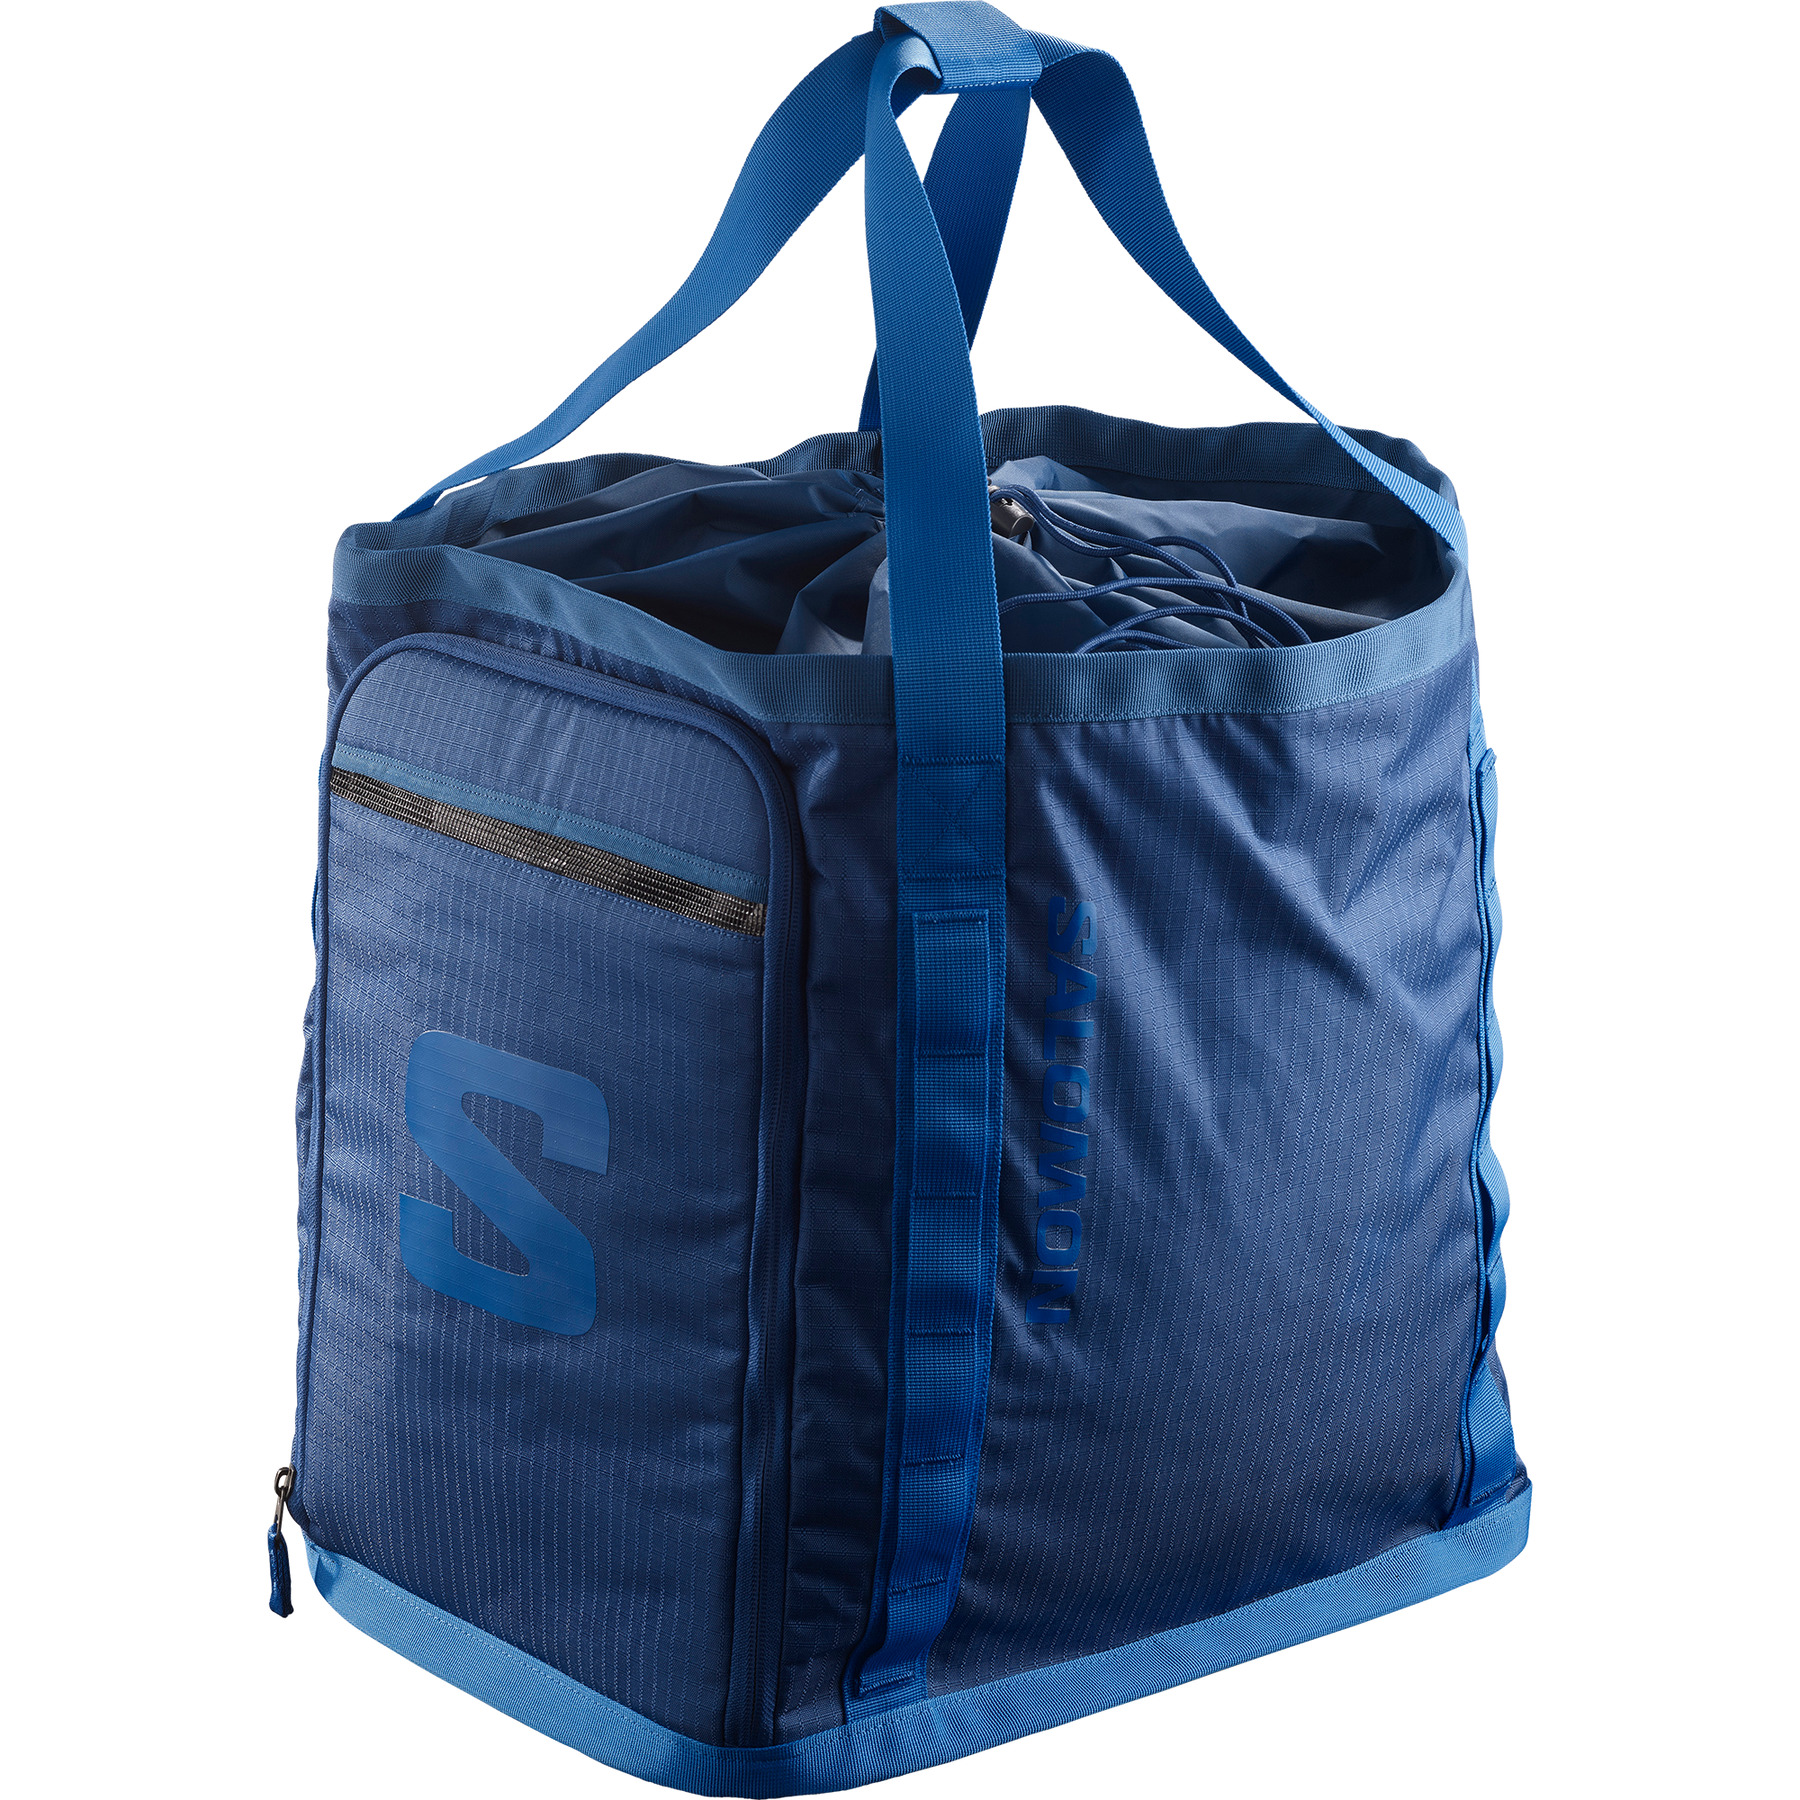 EXTEND MAX GEARBAG - 5